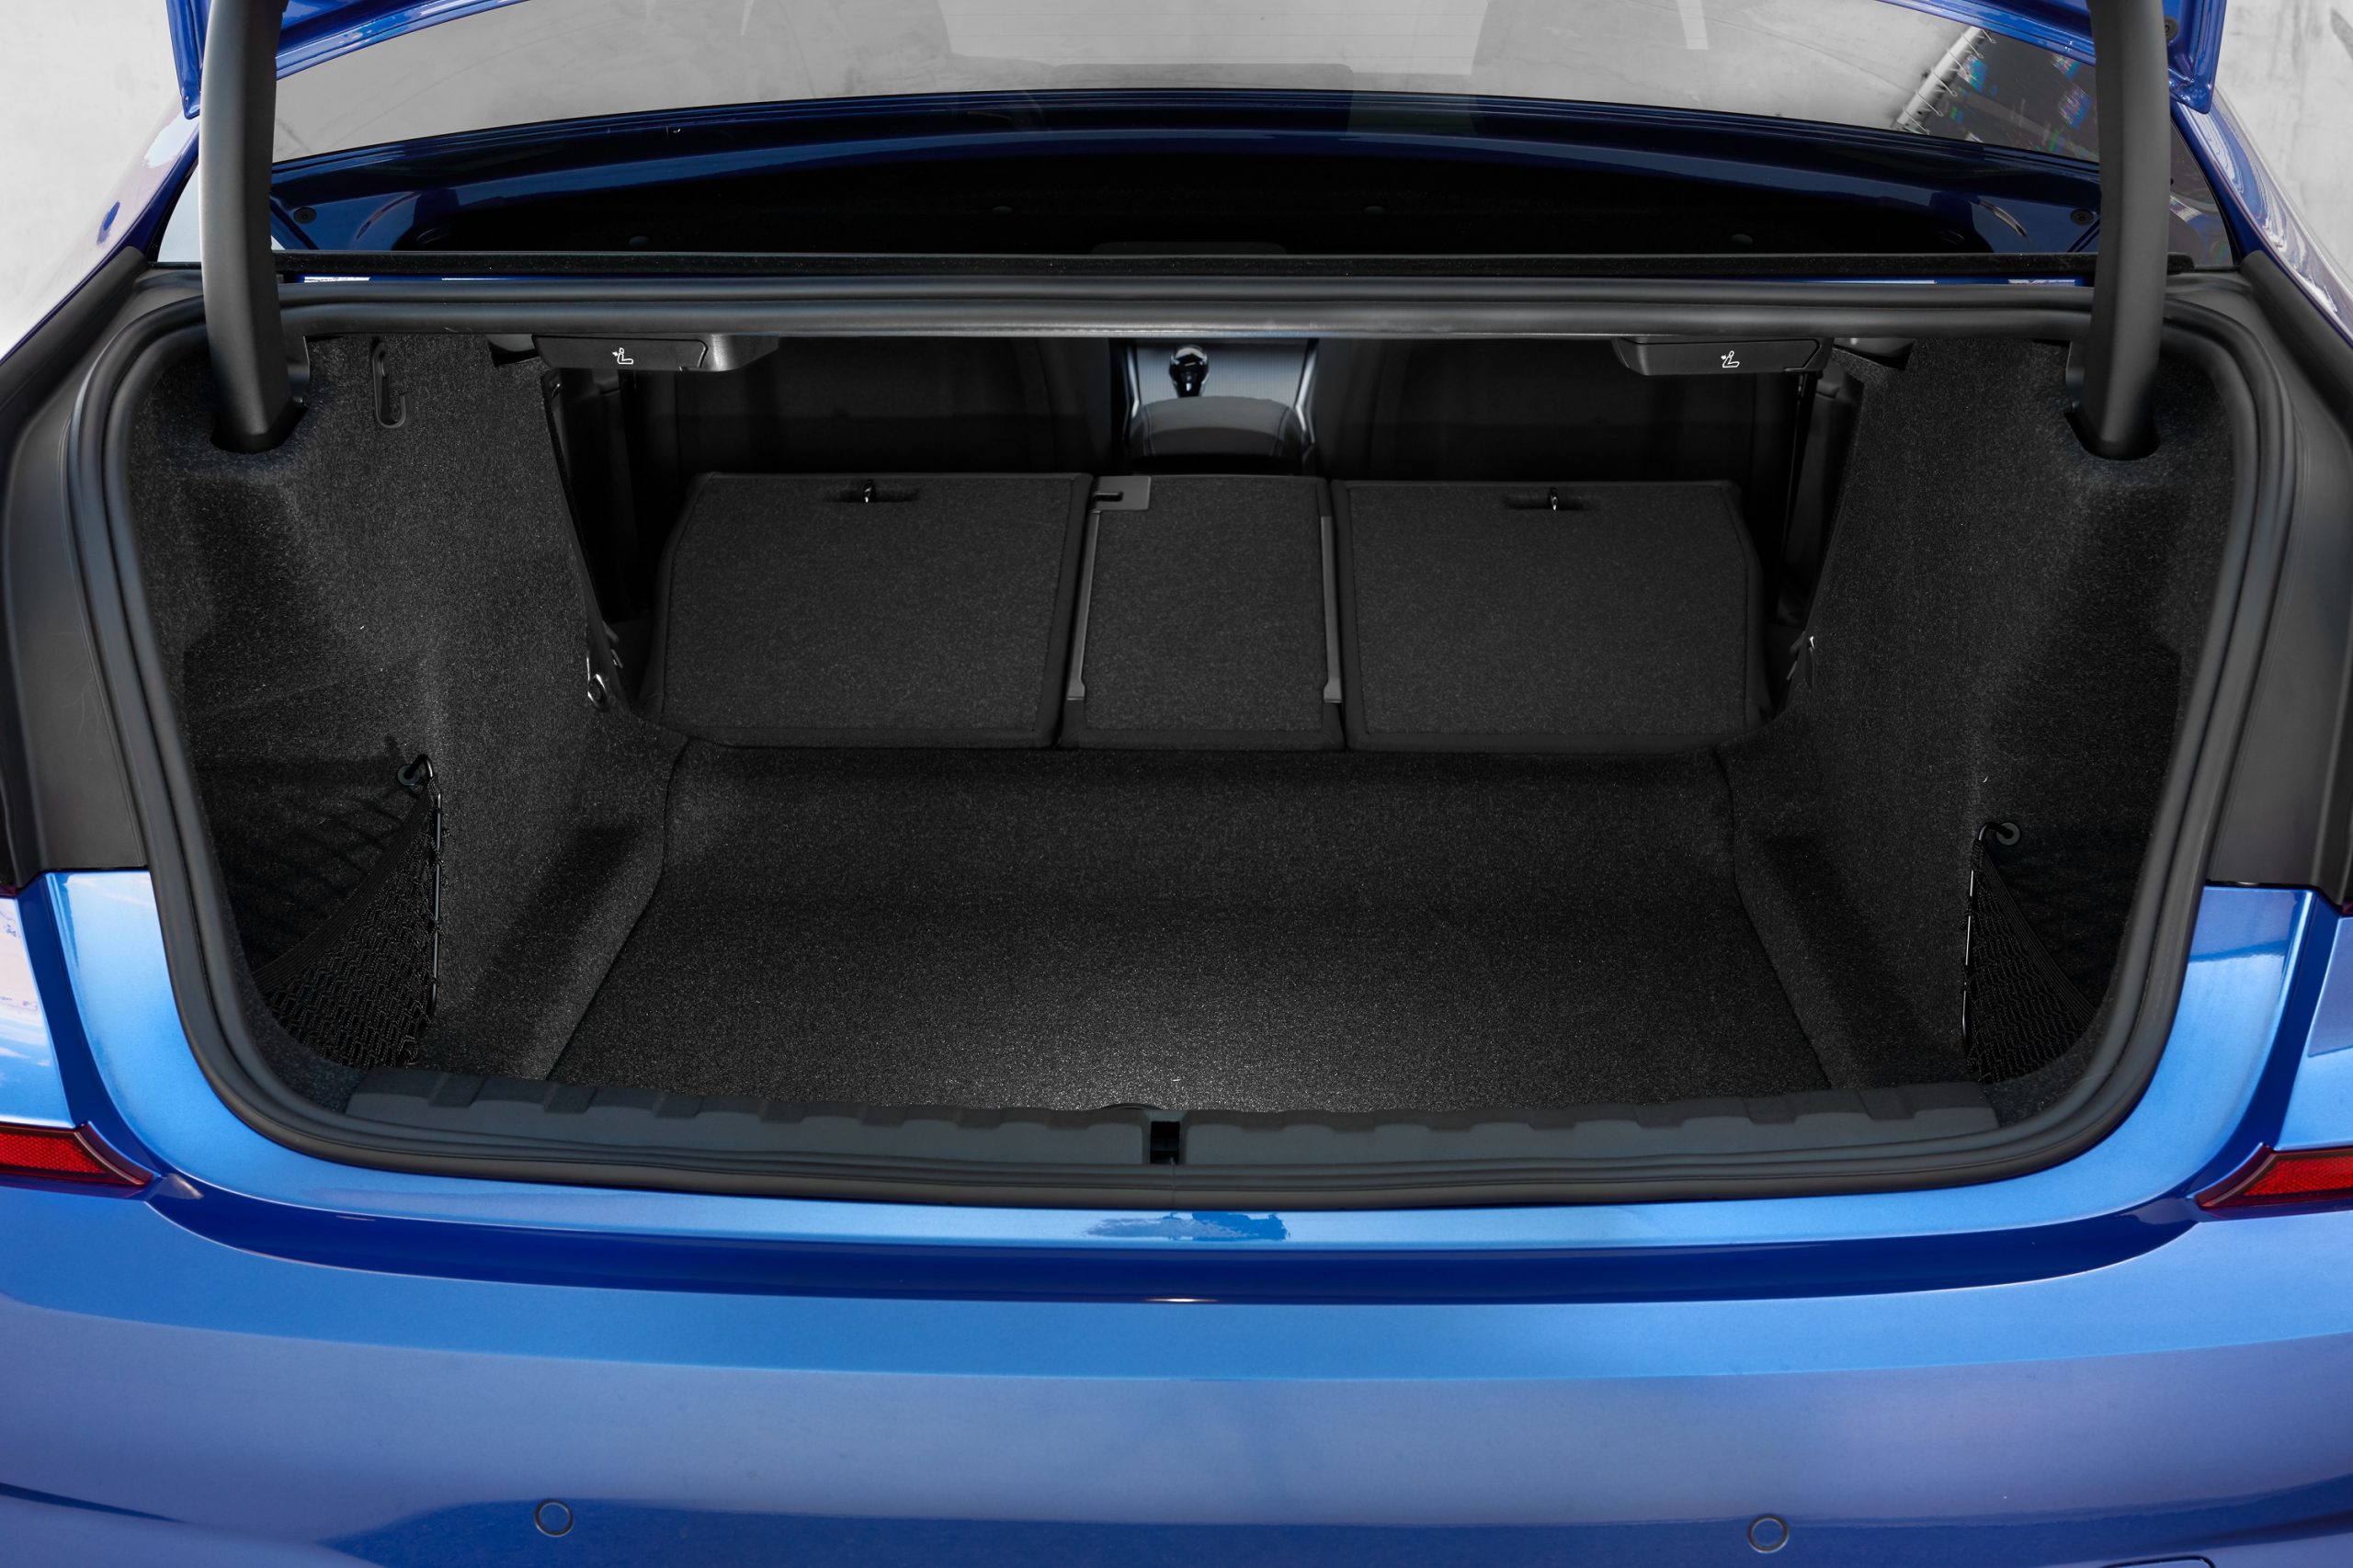 The trunk of a blue BMW 3 Series with the seats down